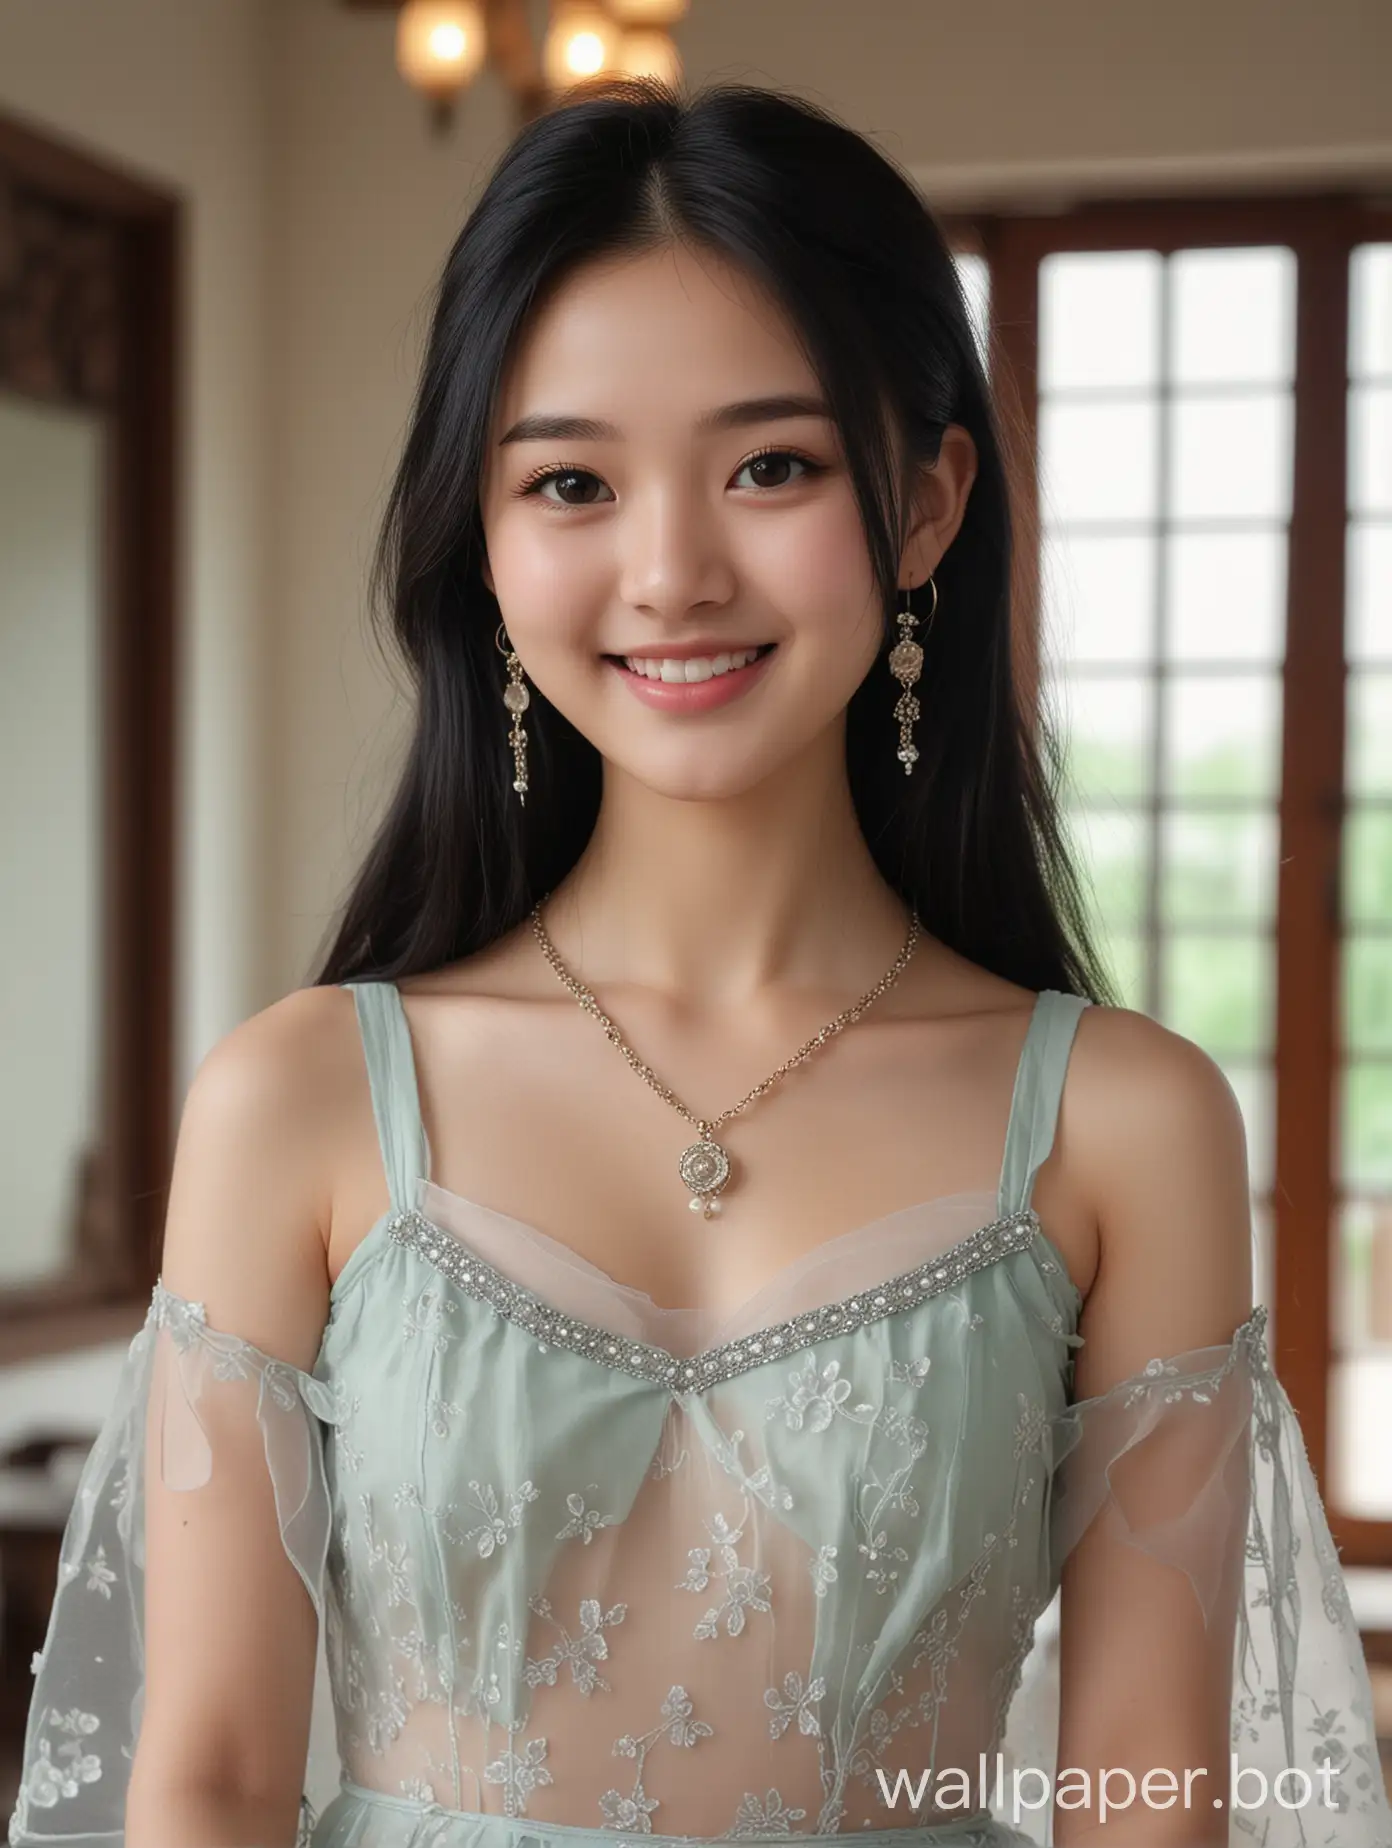 Generate an image of the most beautiful (China Provinces Hainan) actress, a cute pretty girl 18 years old, A-line Dress Transparent, with a fair skin tone and long black hair. She has a round smiling face. The background is a modern house interior. The camera shot captures her from head to stomach. She is wearing makeup and has a necklace, jhumka earring, and bracelet on.